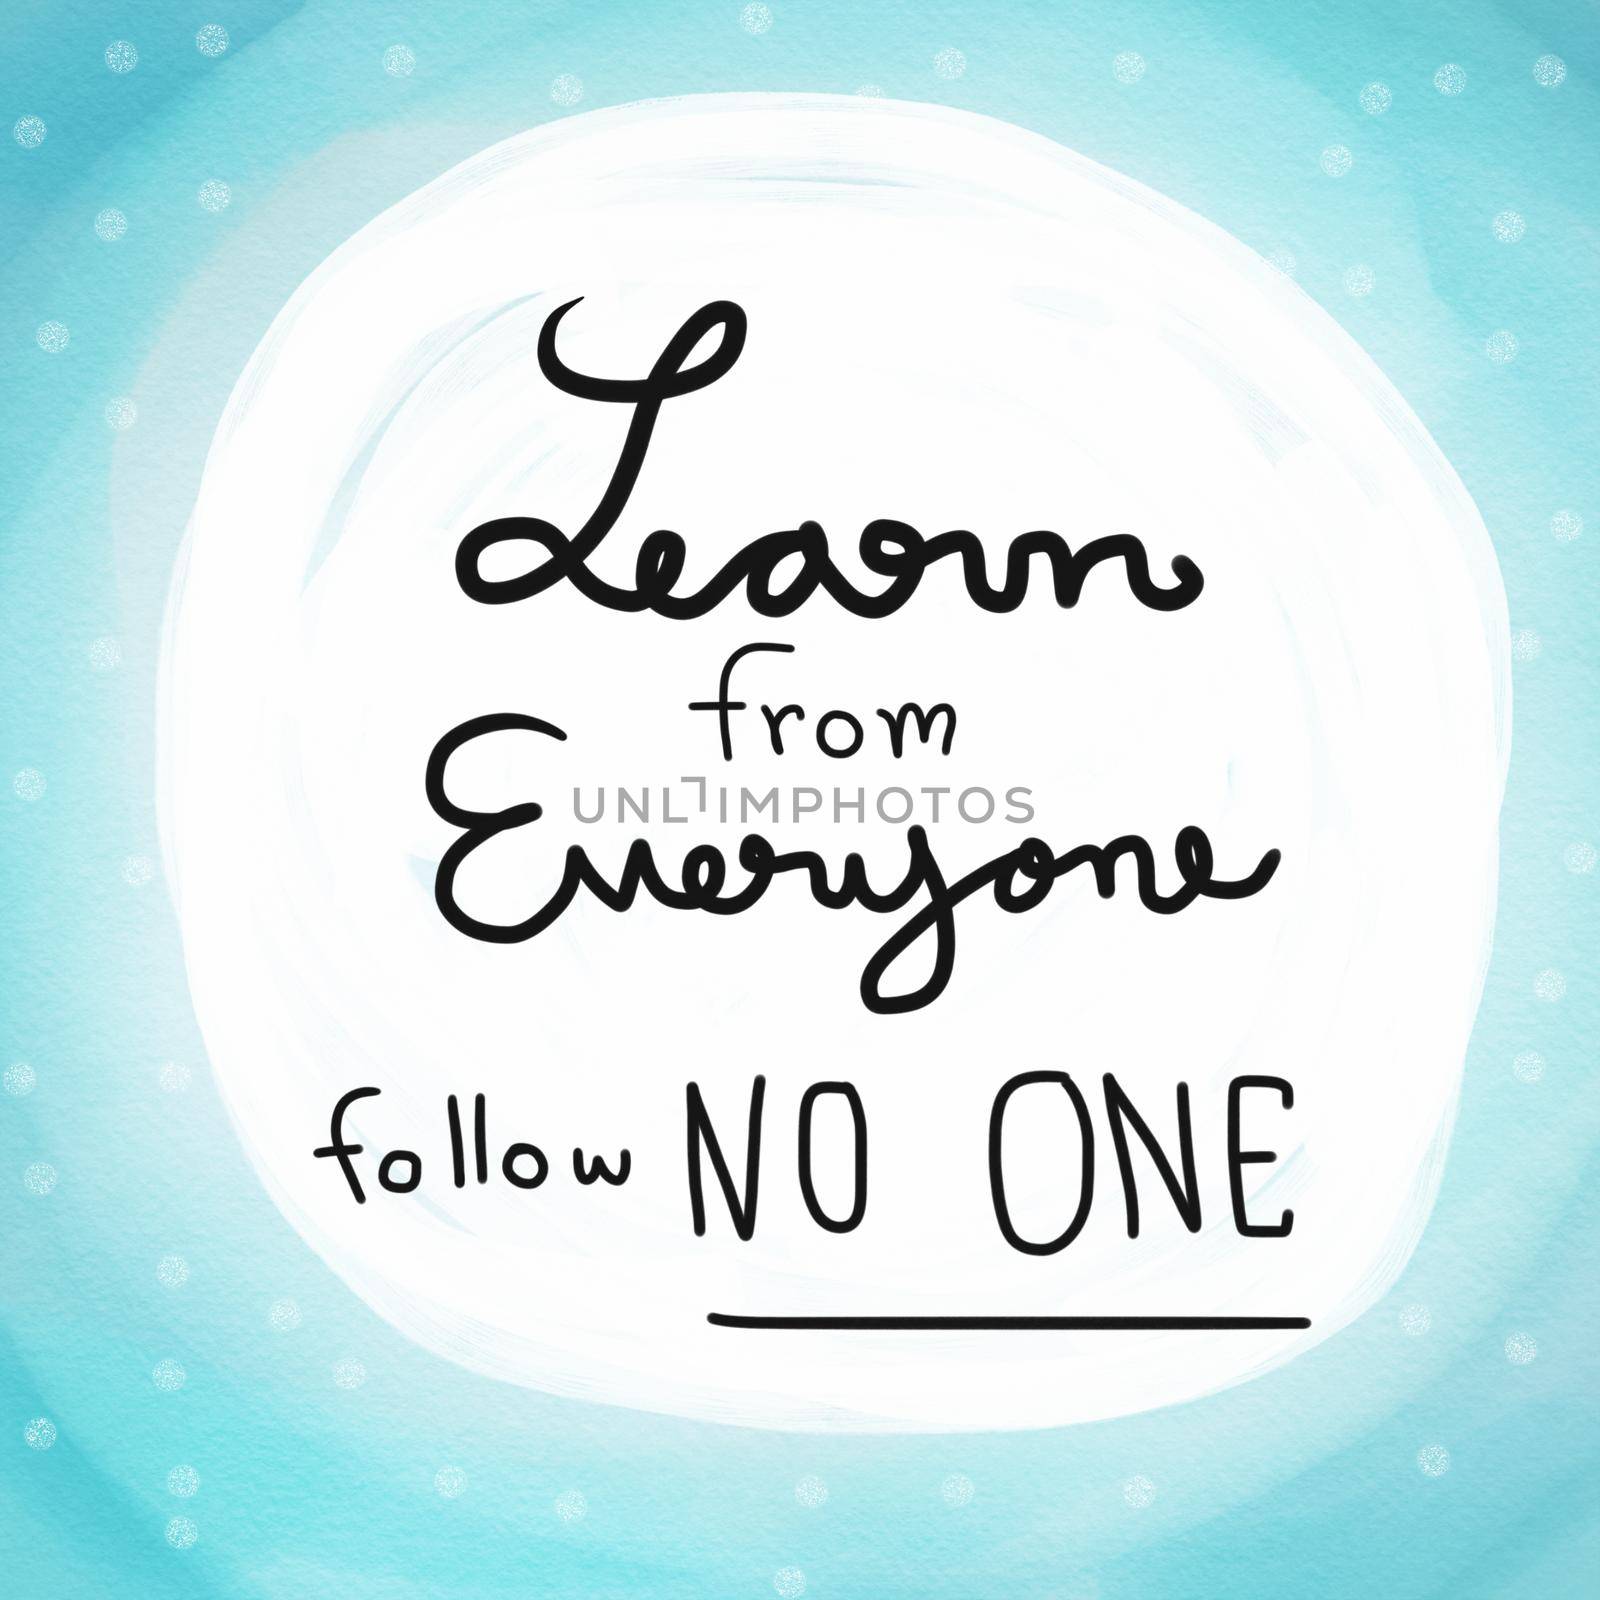 Learn from everyone follow no one word lettering on blue watercolor background illustration by Yoopho